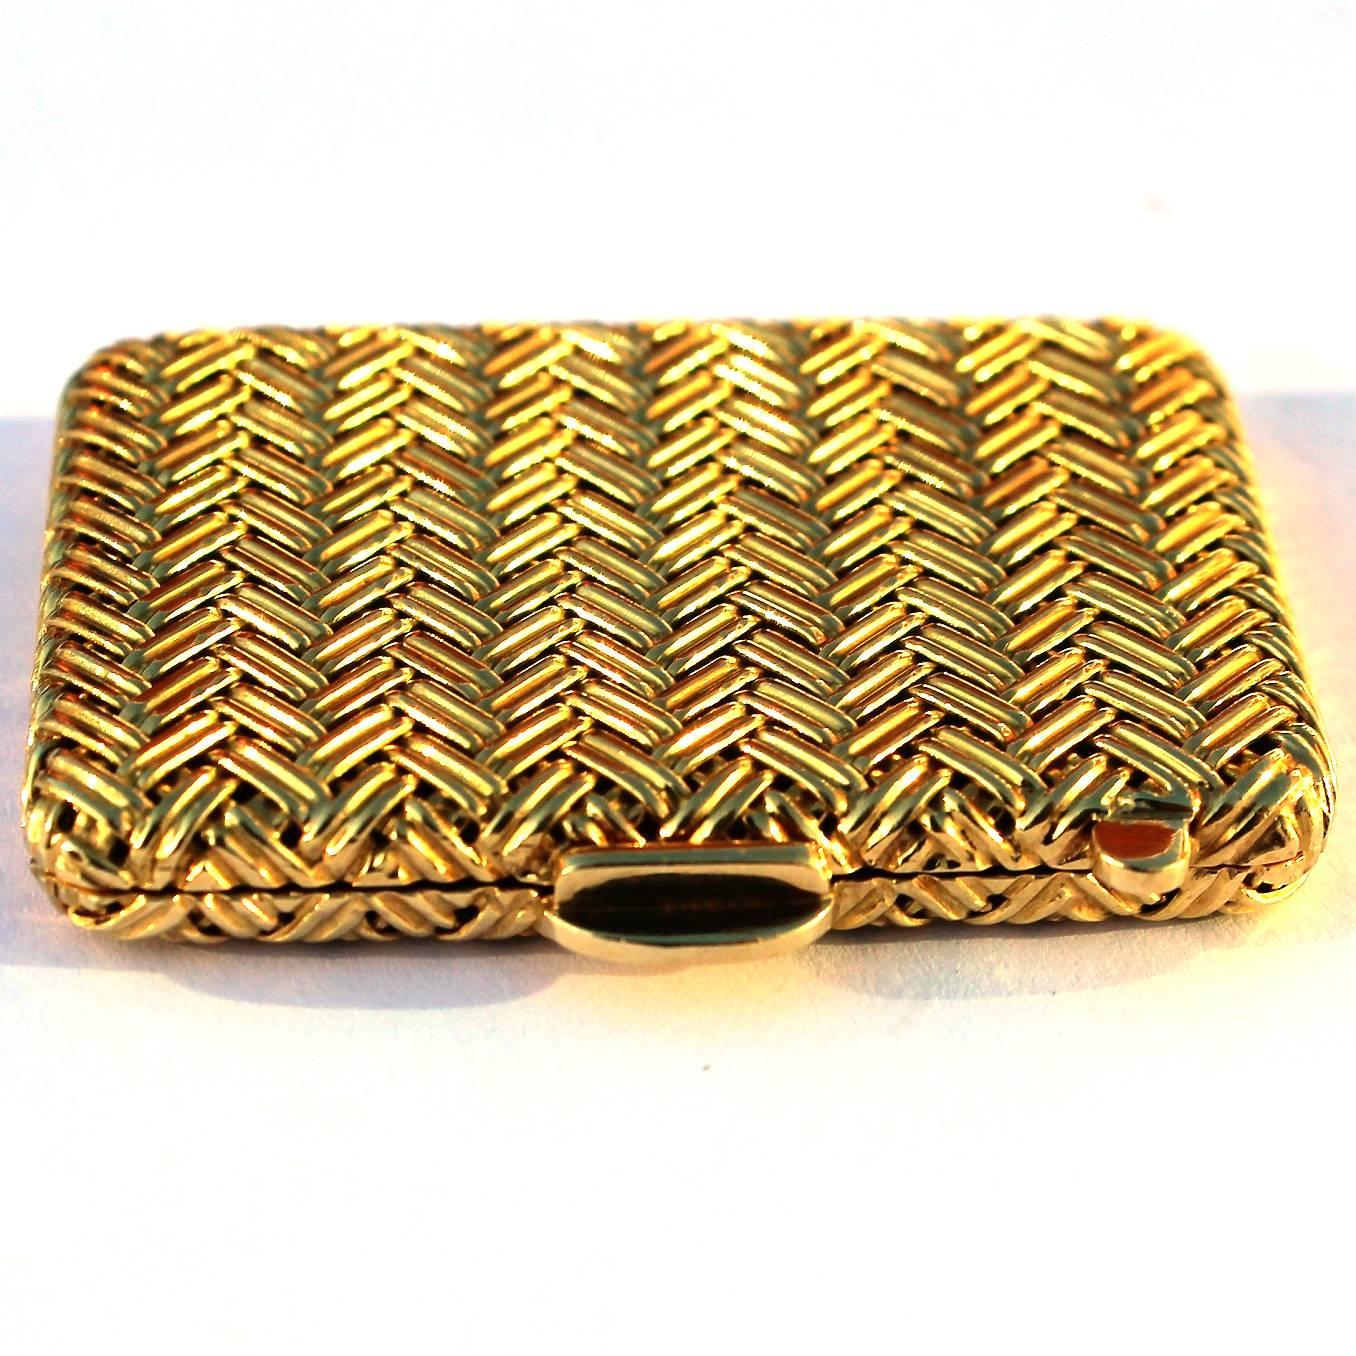 Fine vintage 18-carat yellow gold travelling double photograph frame, Classic herringbone design 1980s, probably Italian.
Size: 4 x 3 cms.
Weight approximately 28.6 g.